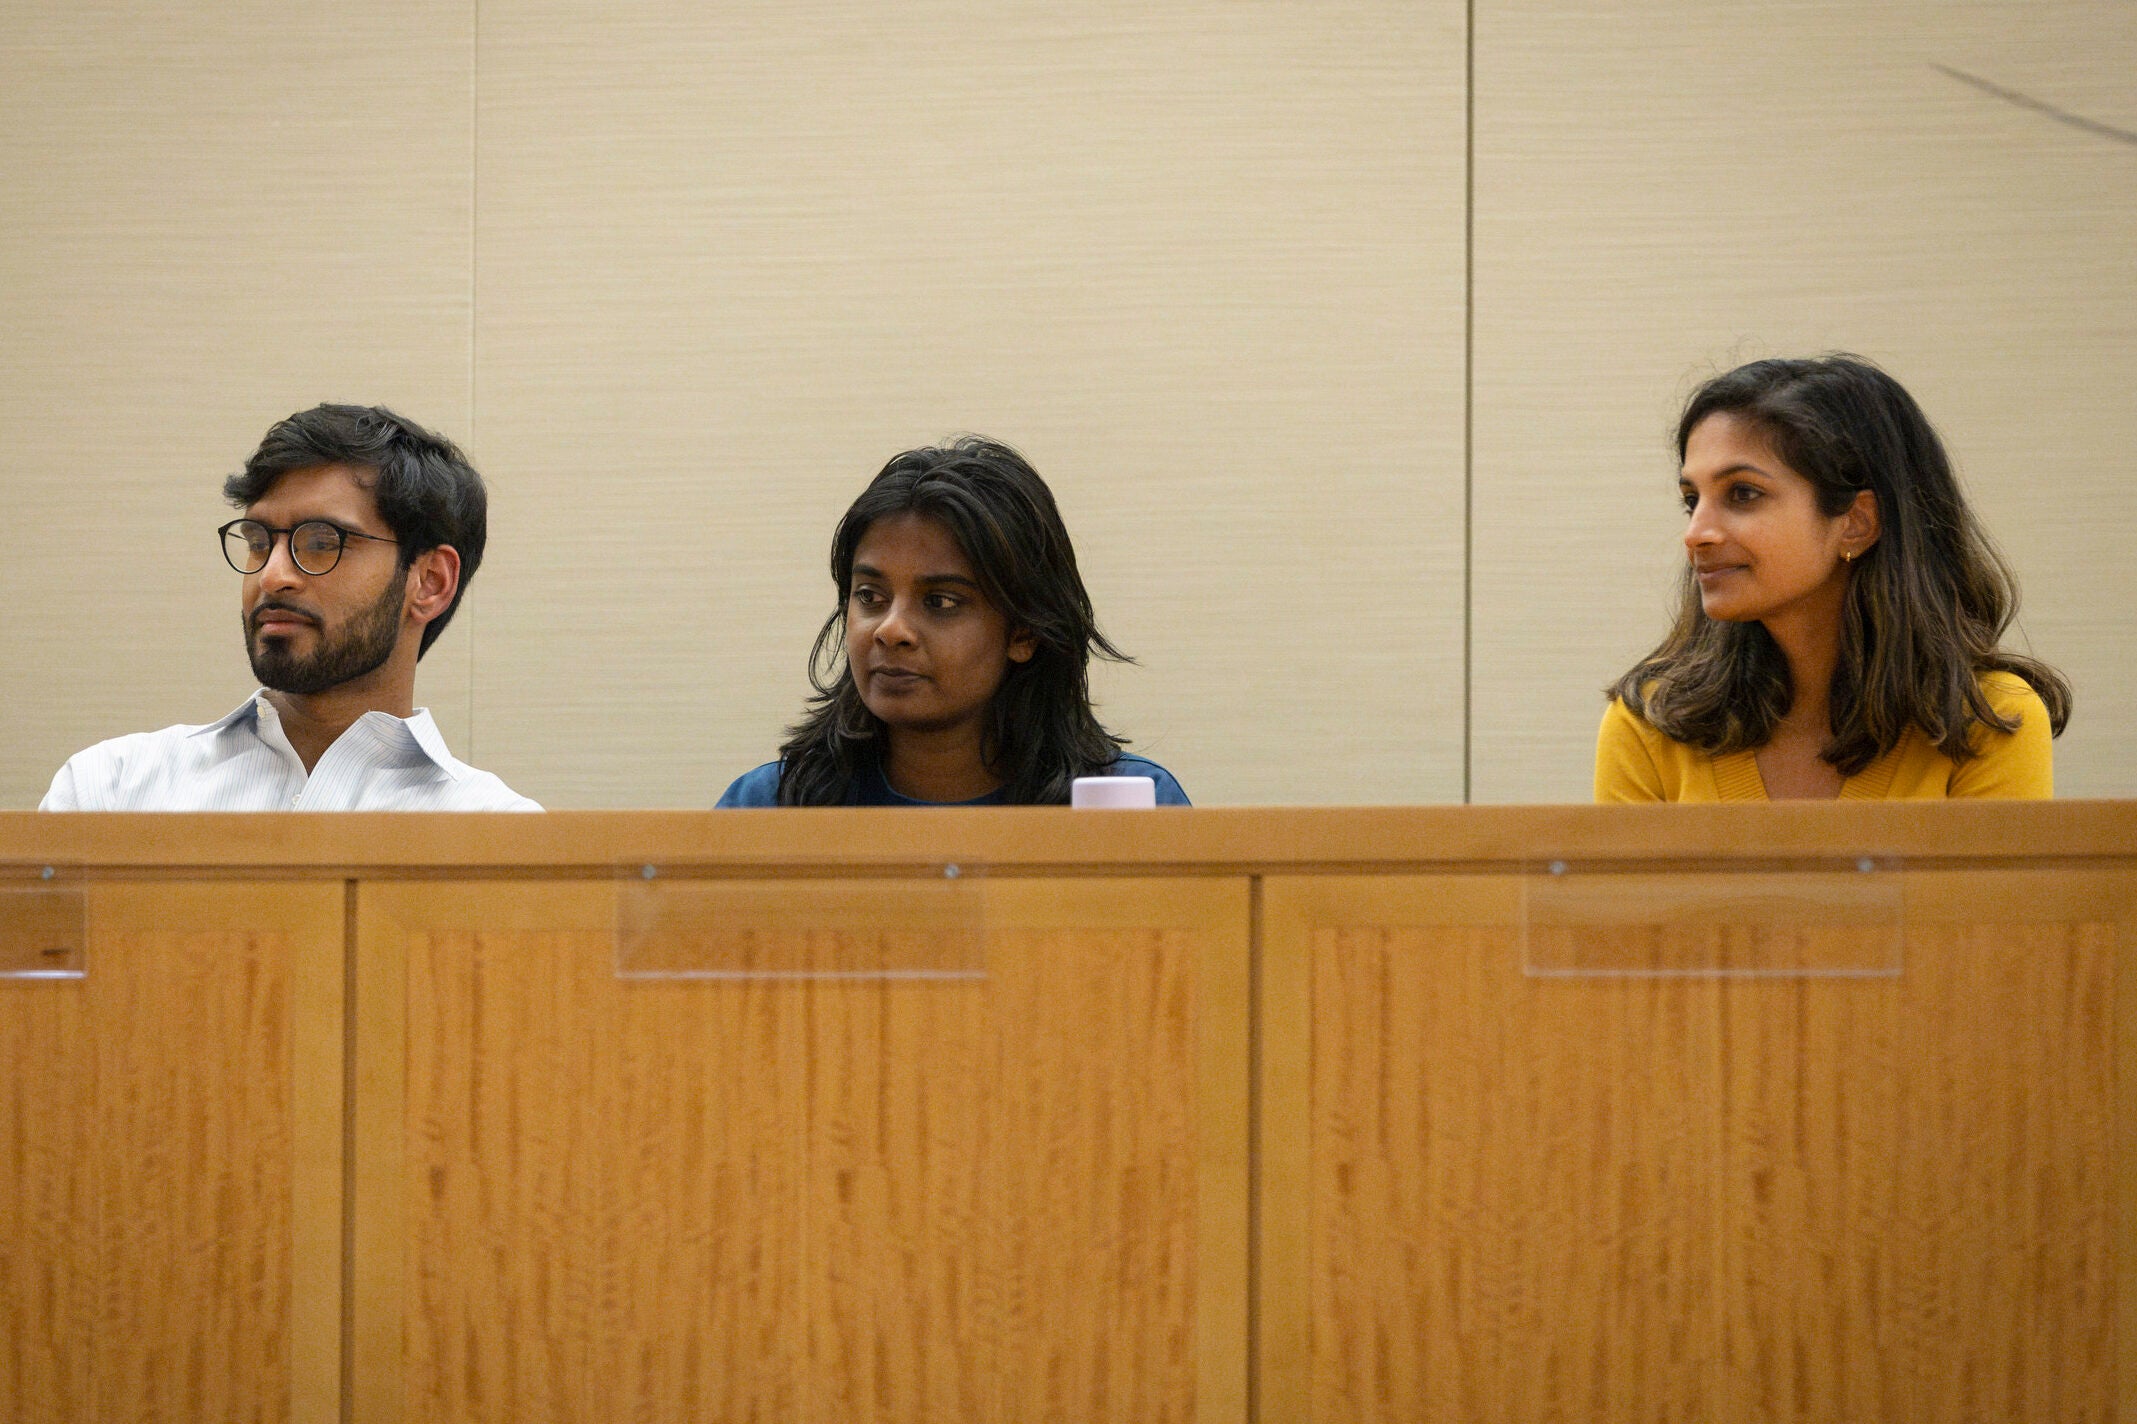 Three students listening to the speakers while sitting behind a wooden desk.